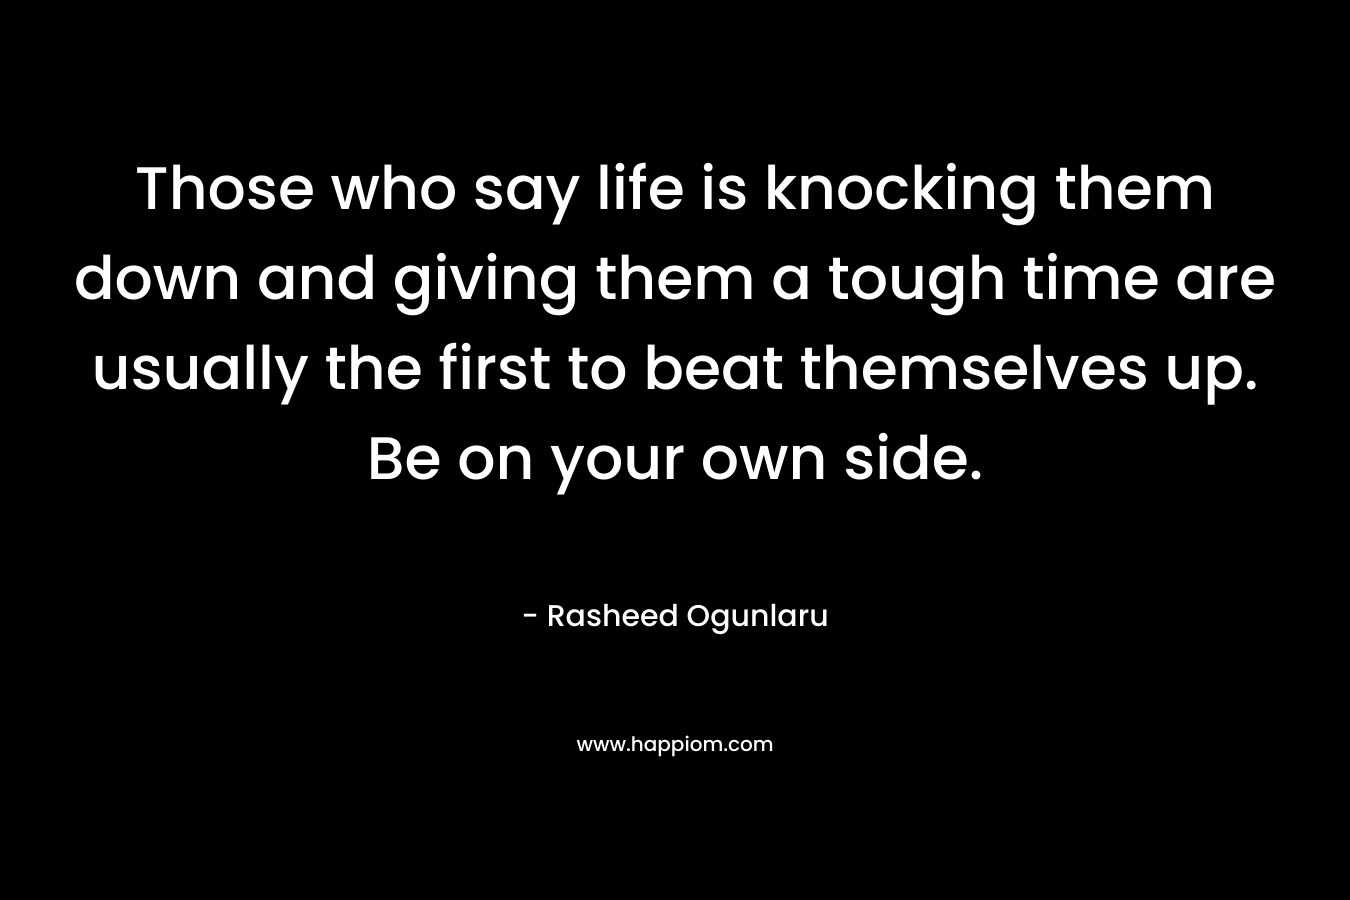 Those who say life is knocking them down and giving them a tough time are usually the first to beat themselves up. Be on your own side. – Rasheed Ogunlaru